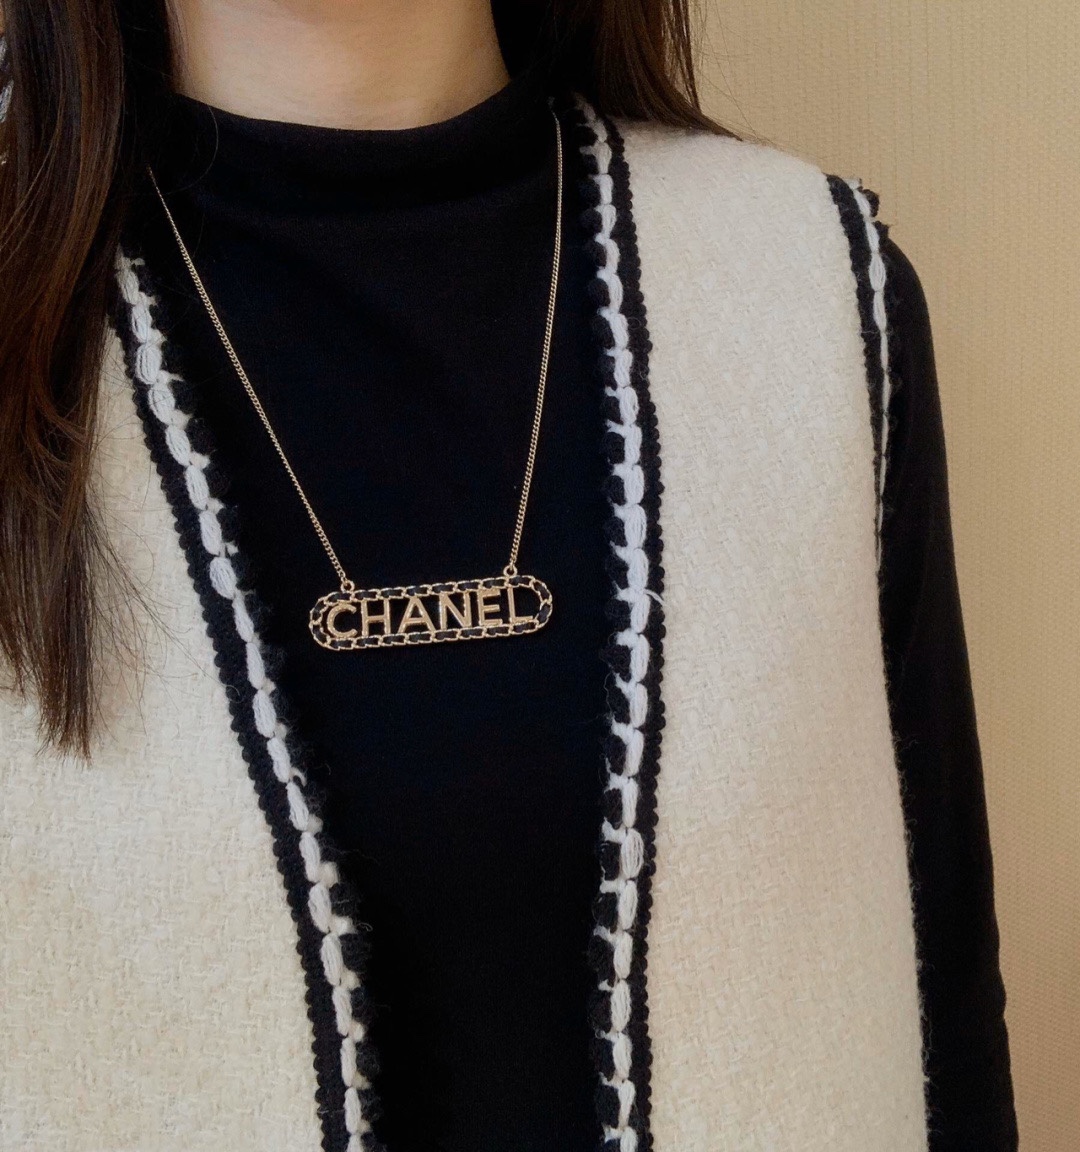 X096 Chanel necklace 110310